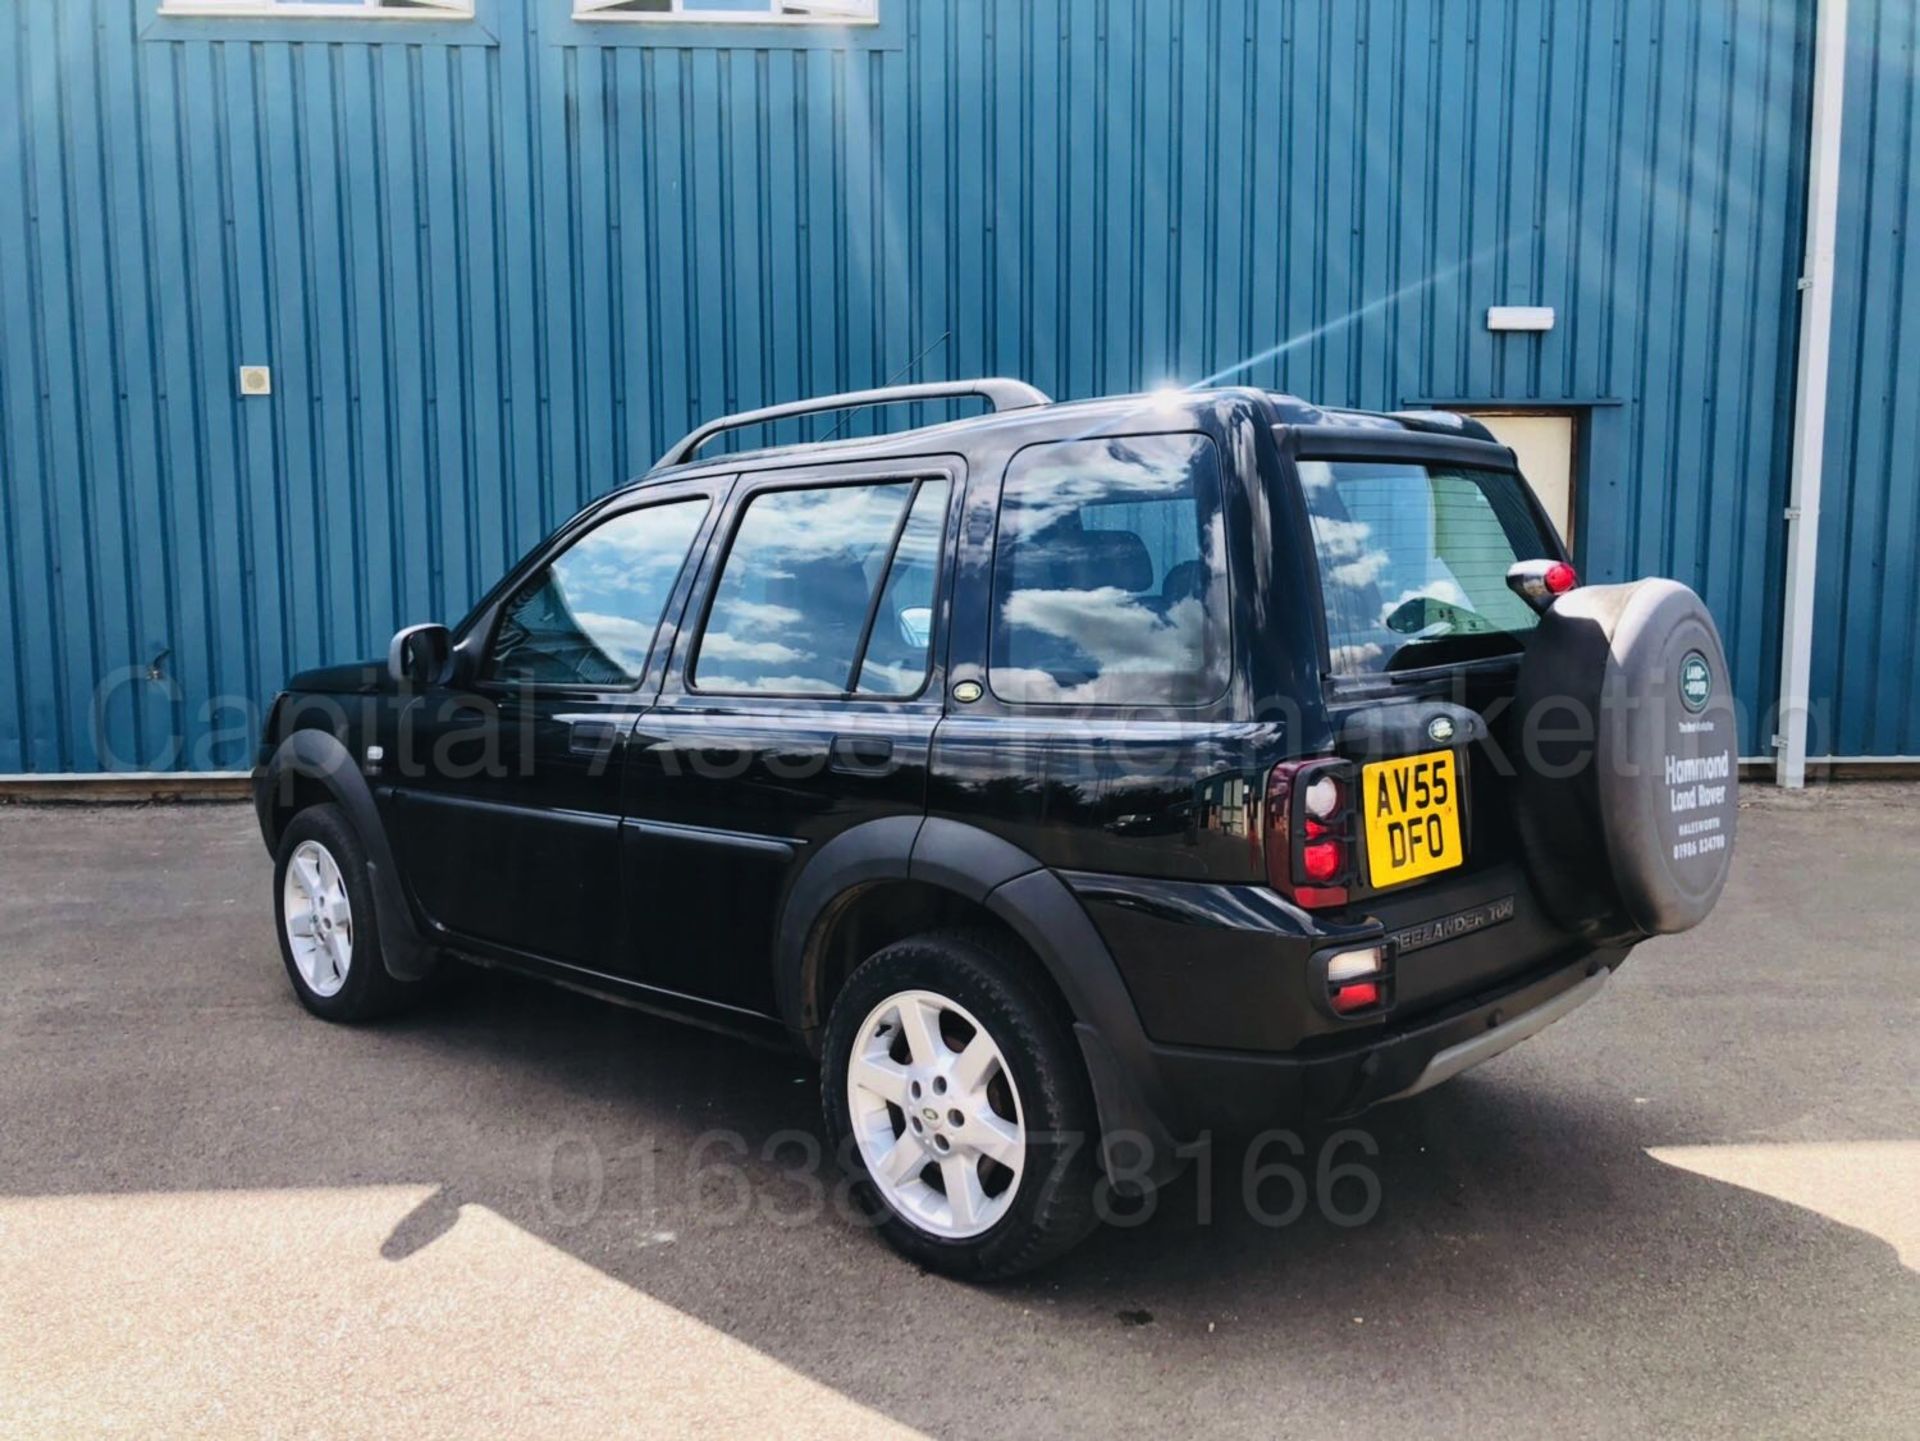 LAND ROVER FREELANDER *HSE EDITION* (2006 MODEL) '2.0 TD4 - AUTO' *LEATHER - AIR CON* (NO VAT) - Image 9 of 27